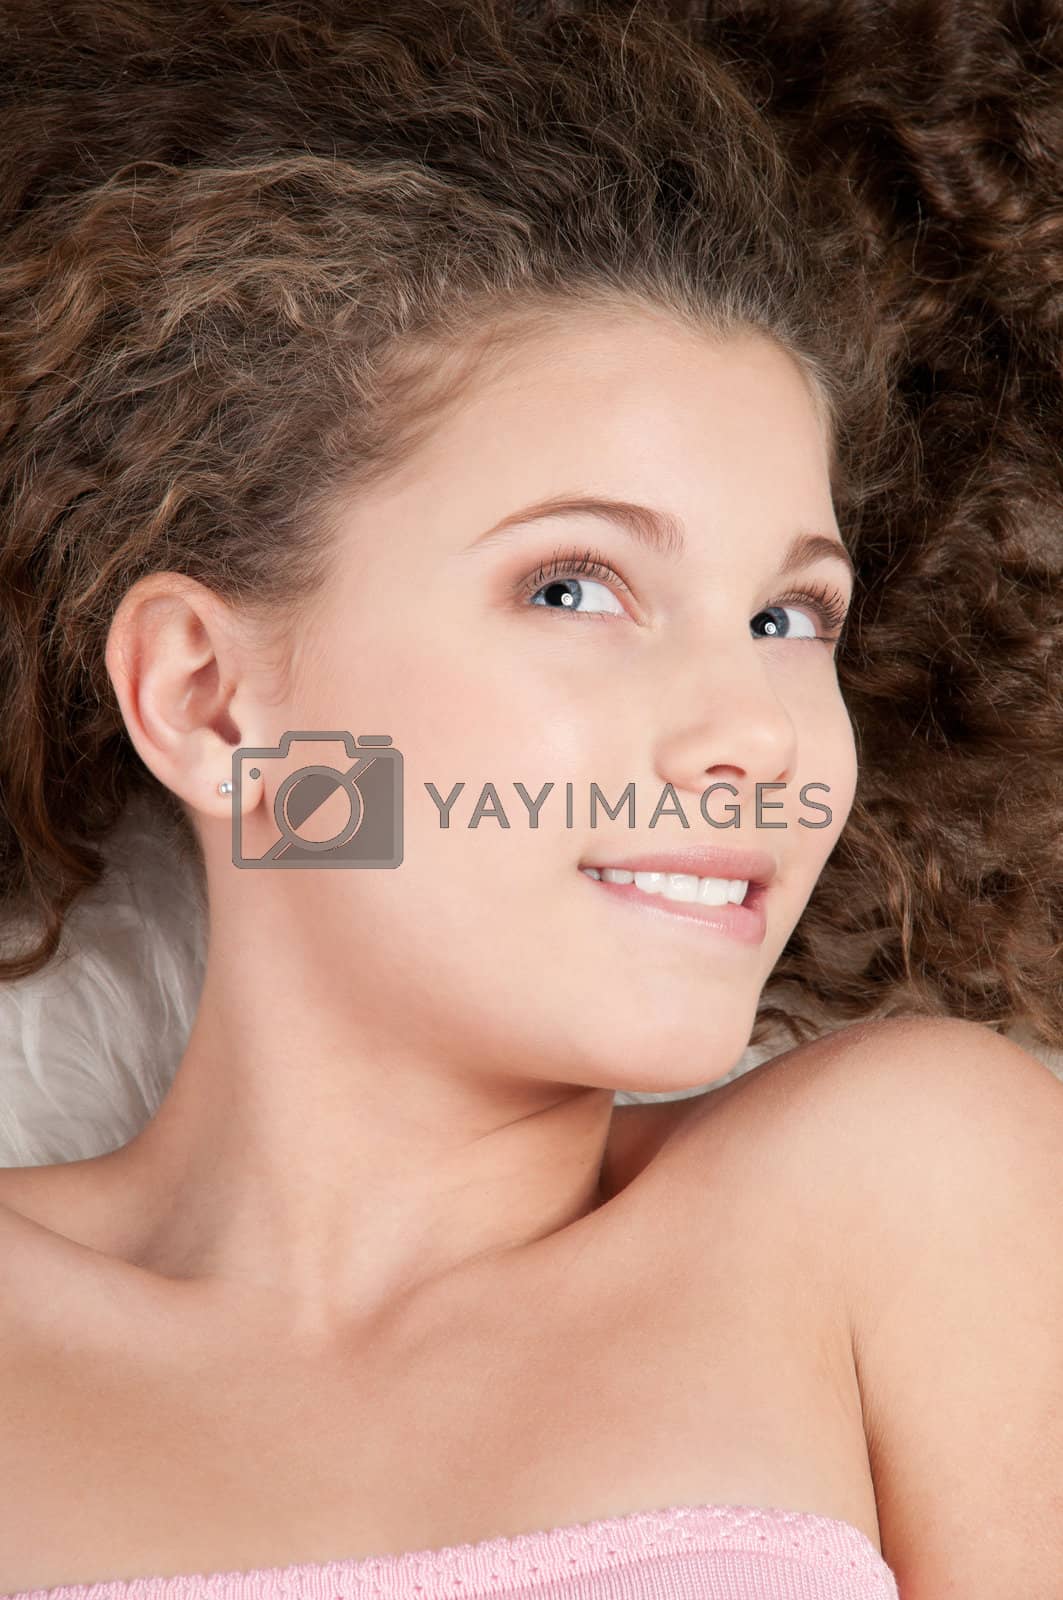 Royalty free image of Girl with perfect curly hair lying on fur bed by markin